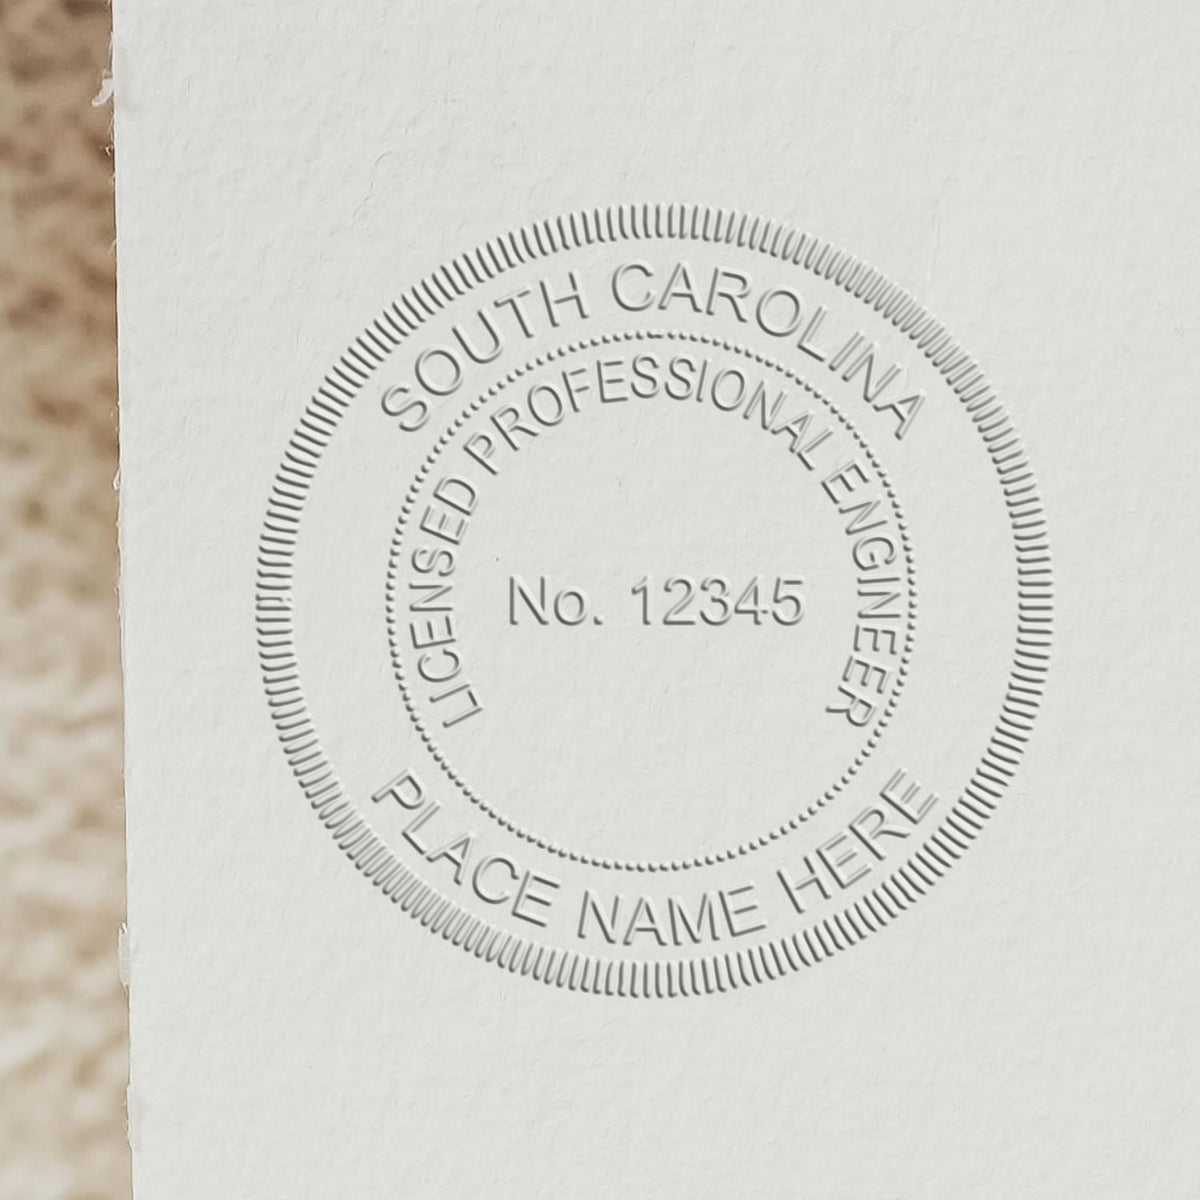 An alternative view of the State of South Carolina Extended Long Reach Engineer Seal stamped on a sheet of paper showing the image in use